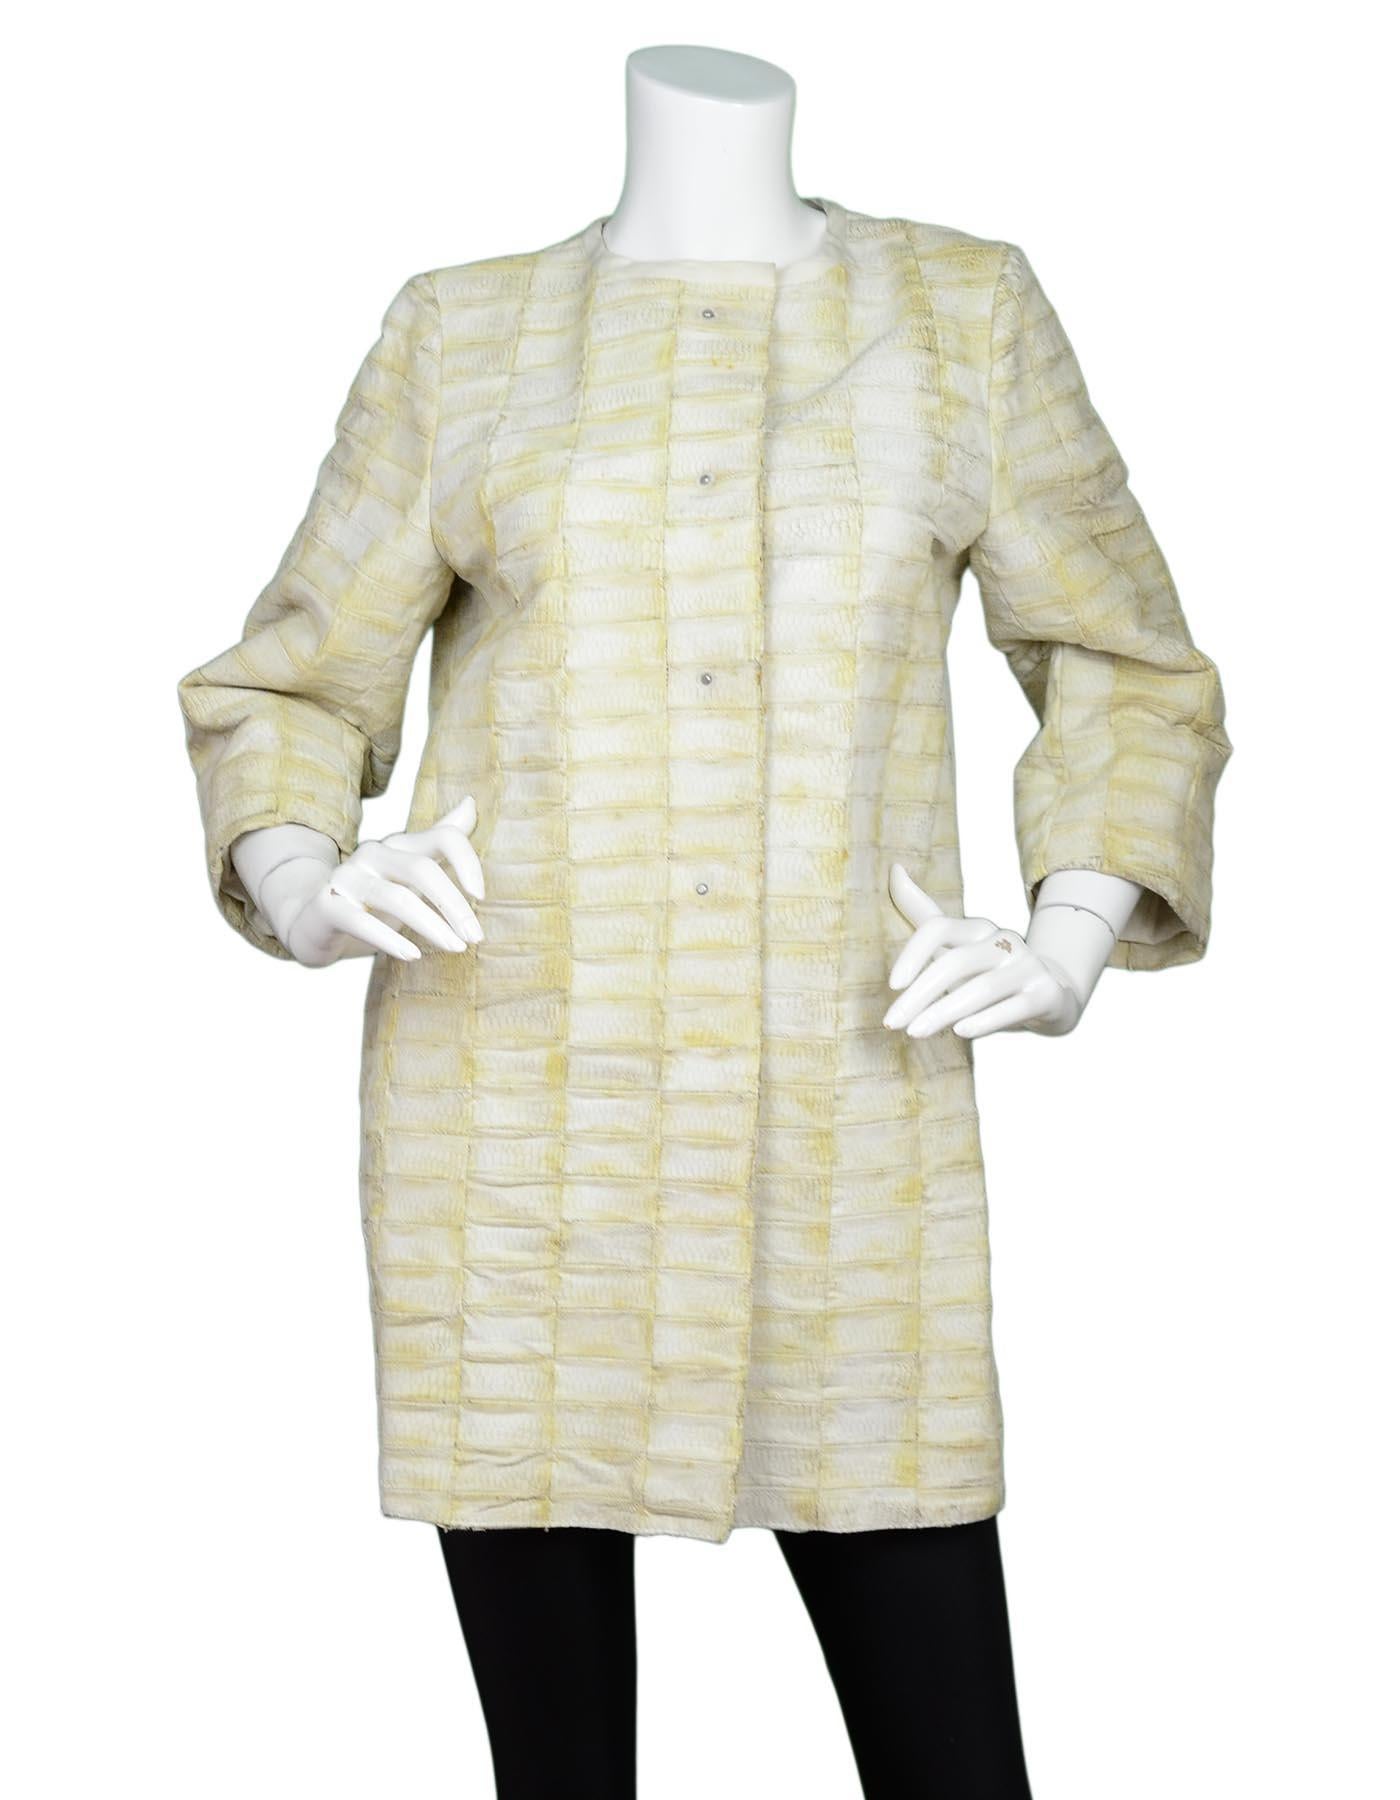 Ter Et Bantine Beige 3/4 Sleeve Embossed Snakeskin Coat Sz 42

Made In: Italy
Color: Beige
Materials: 100% chicken feet
Lining: 100% cotton
Opening/Closure: Snaps at front
Overall Condition: Good pre-owned condition with exception of some